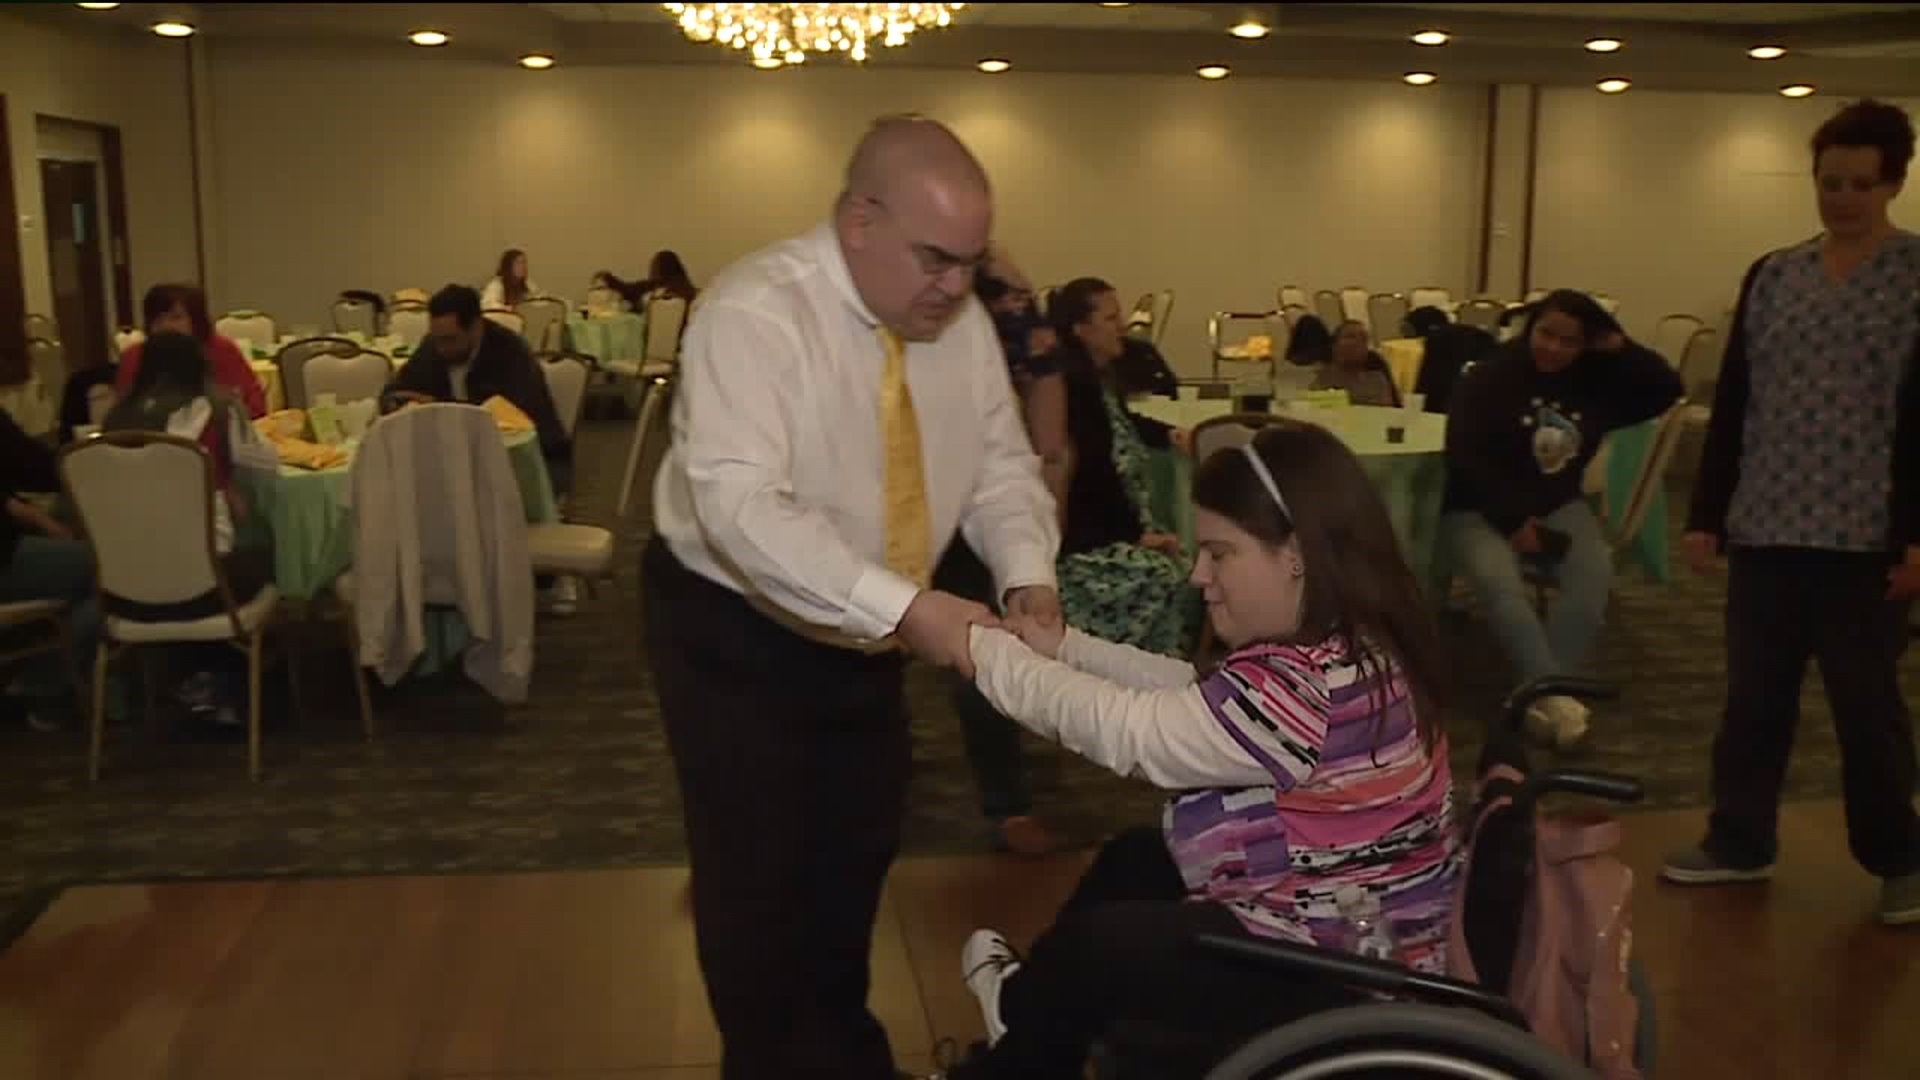 Special Dinner and Dance Held at The Woodlands Inn